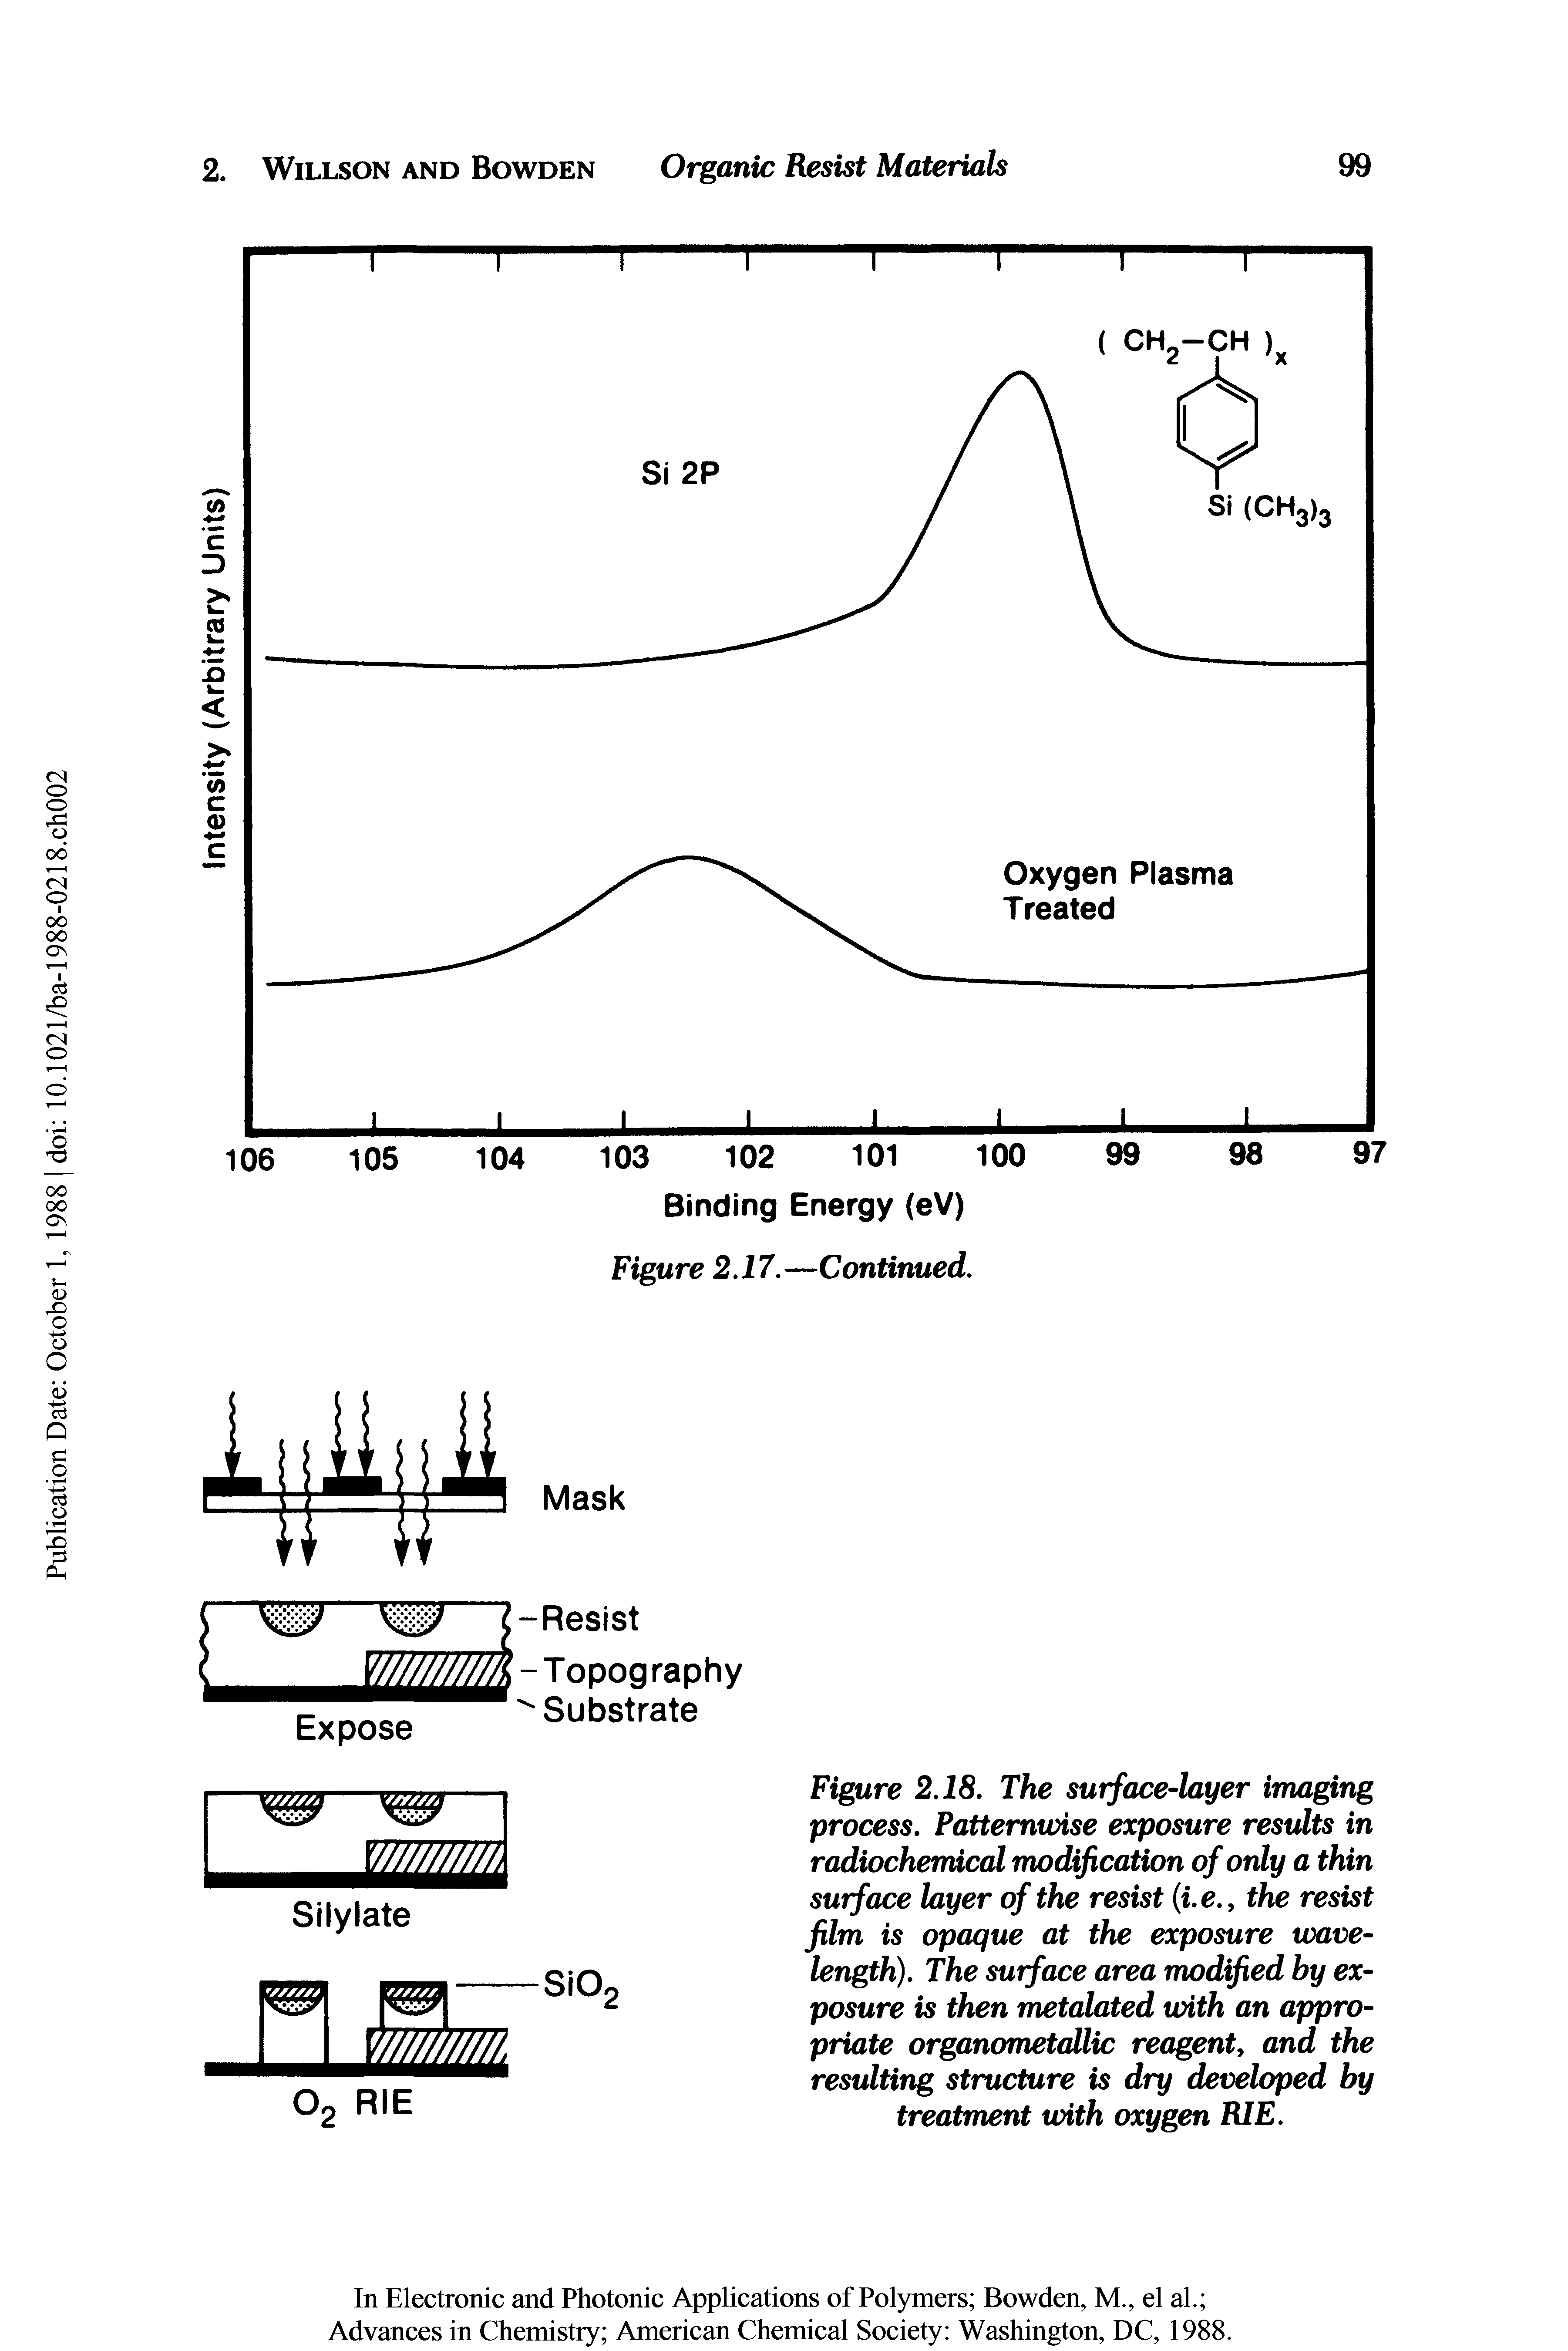 Figure 2.18. The surface-layer imaging process. Pattemwise exposure results in radiochemical modification of only a thin surface layer of the resist (i.e., the resist film is opaque at the exposure wavelength). The surface area modified by exposure is then metalated with an appropriate organometallic reagent, and the resulting structure is dry developed by treatment with oxygen RIE.